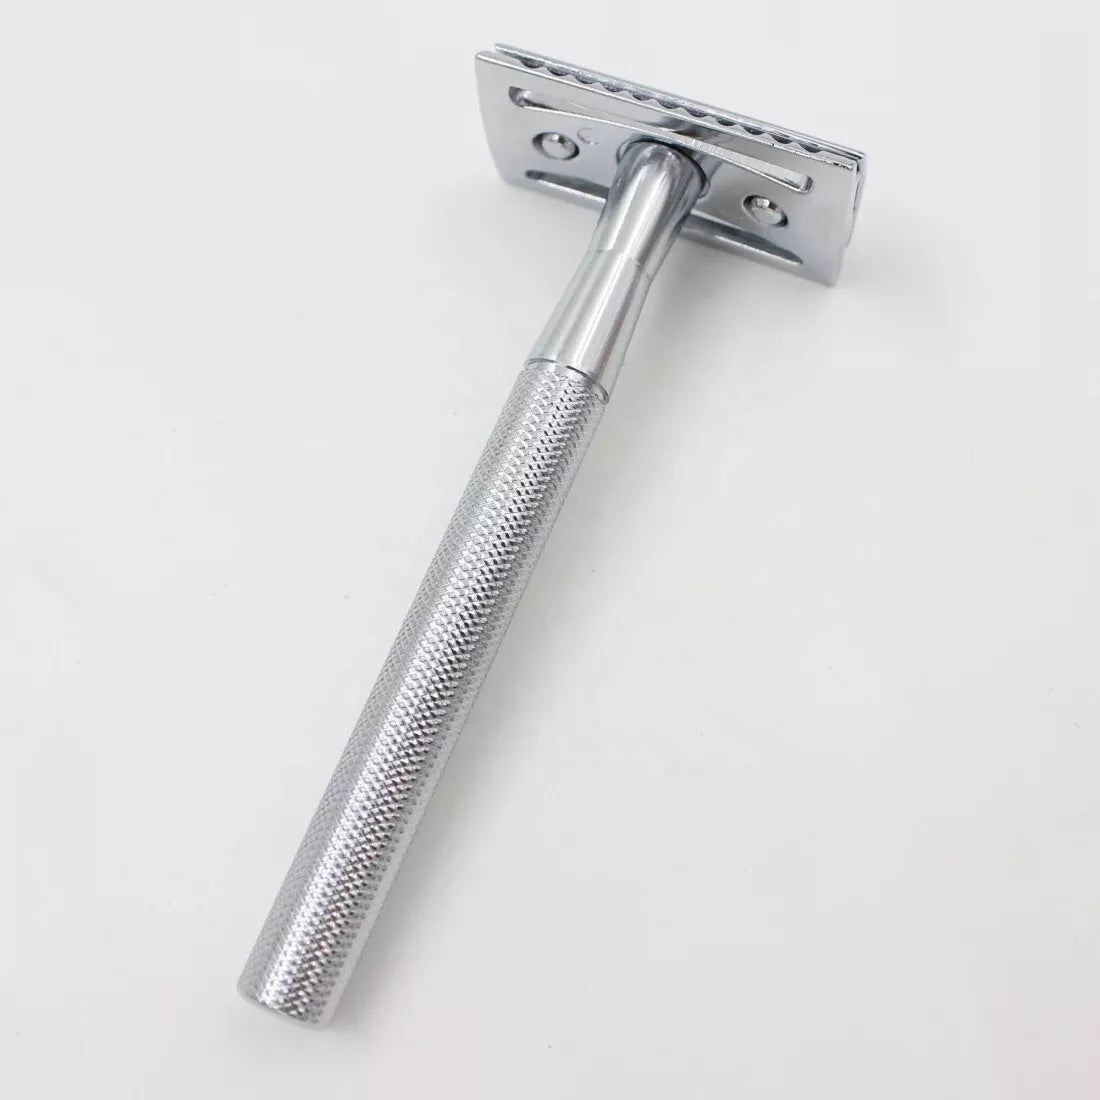 Razor in Brass: with 5 platinum-coated stainless steel double edged razor blades